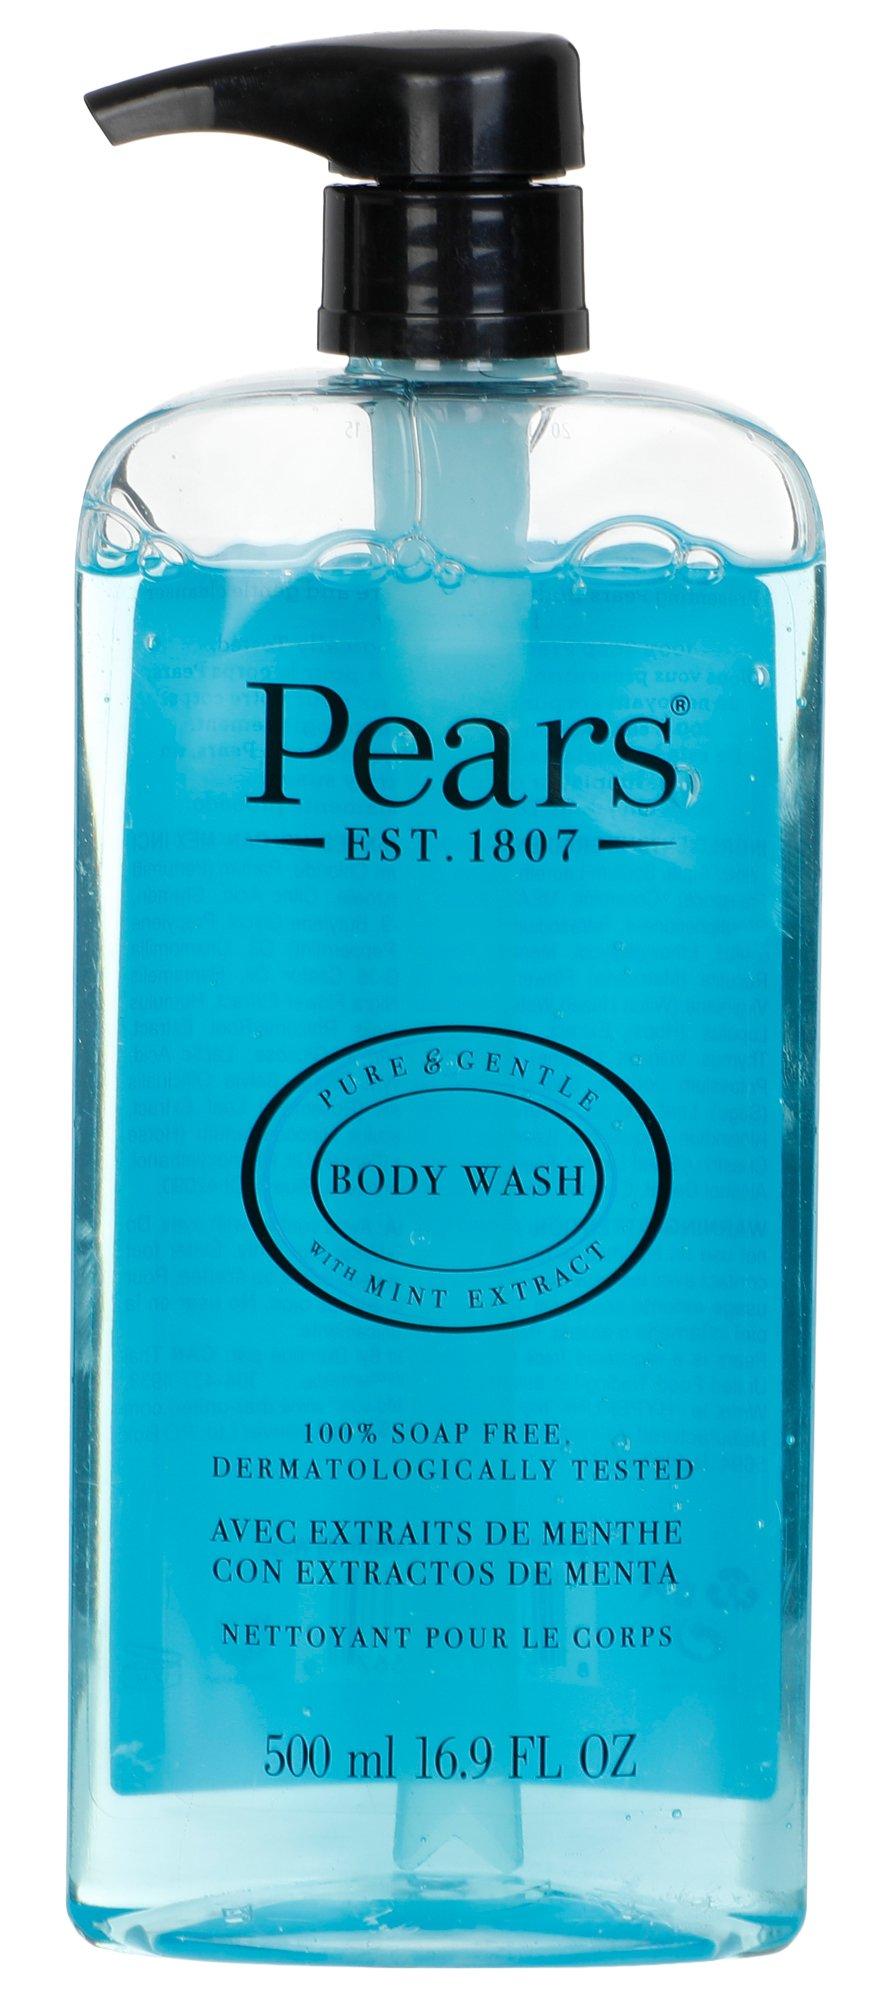 Gentle Body Wash With Mint Extract